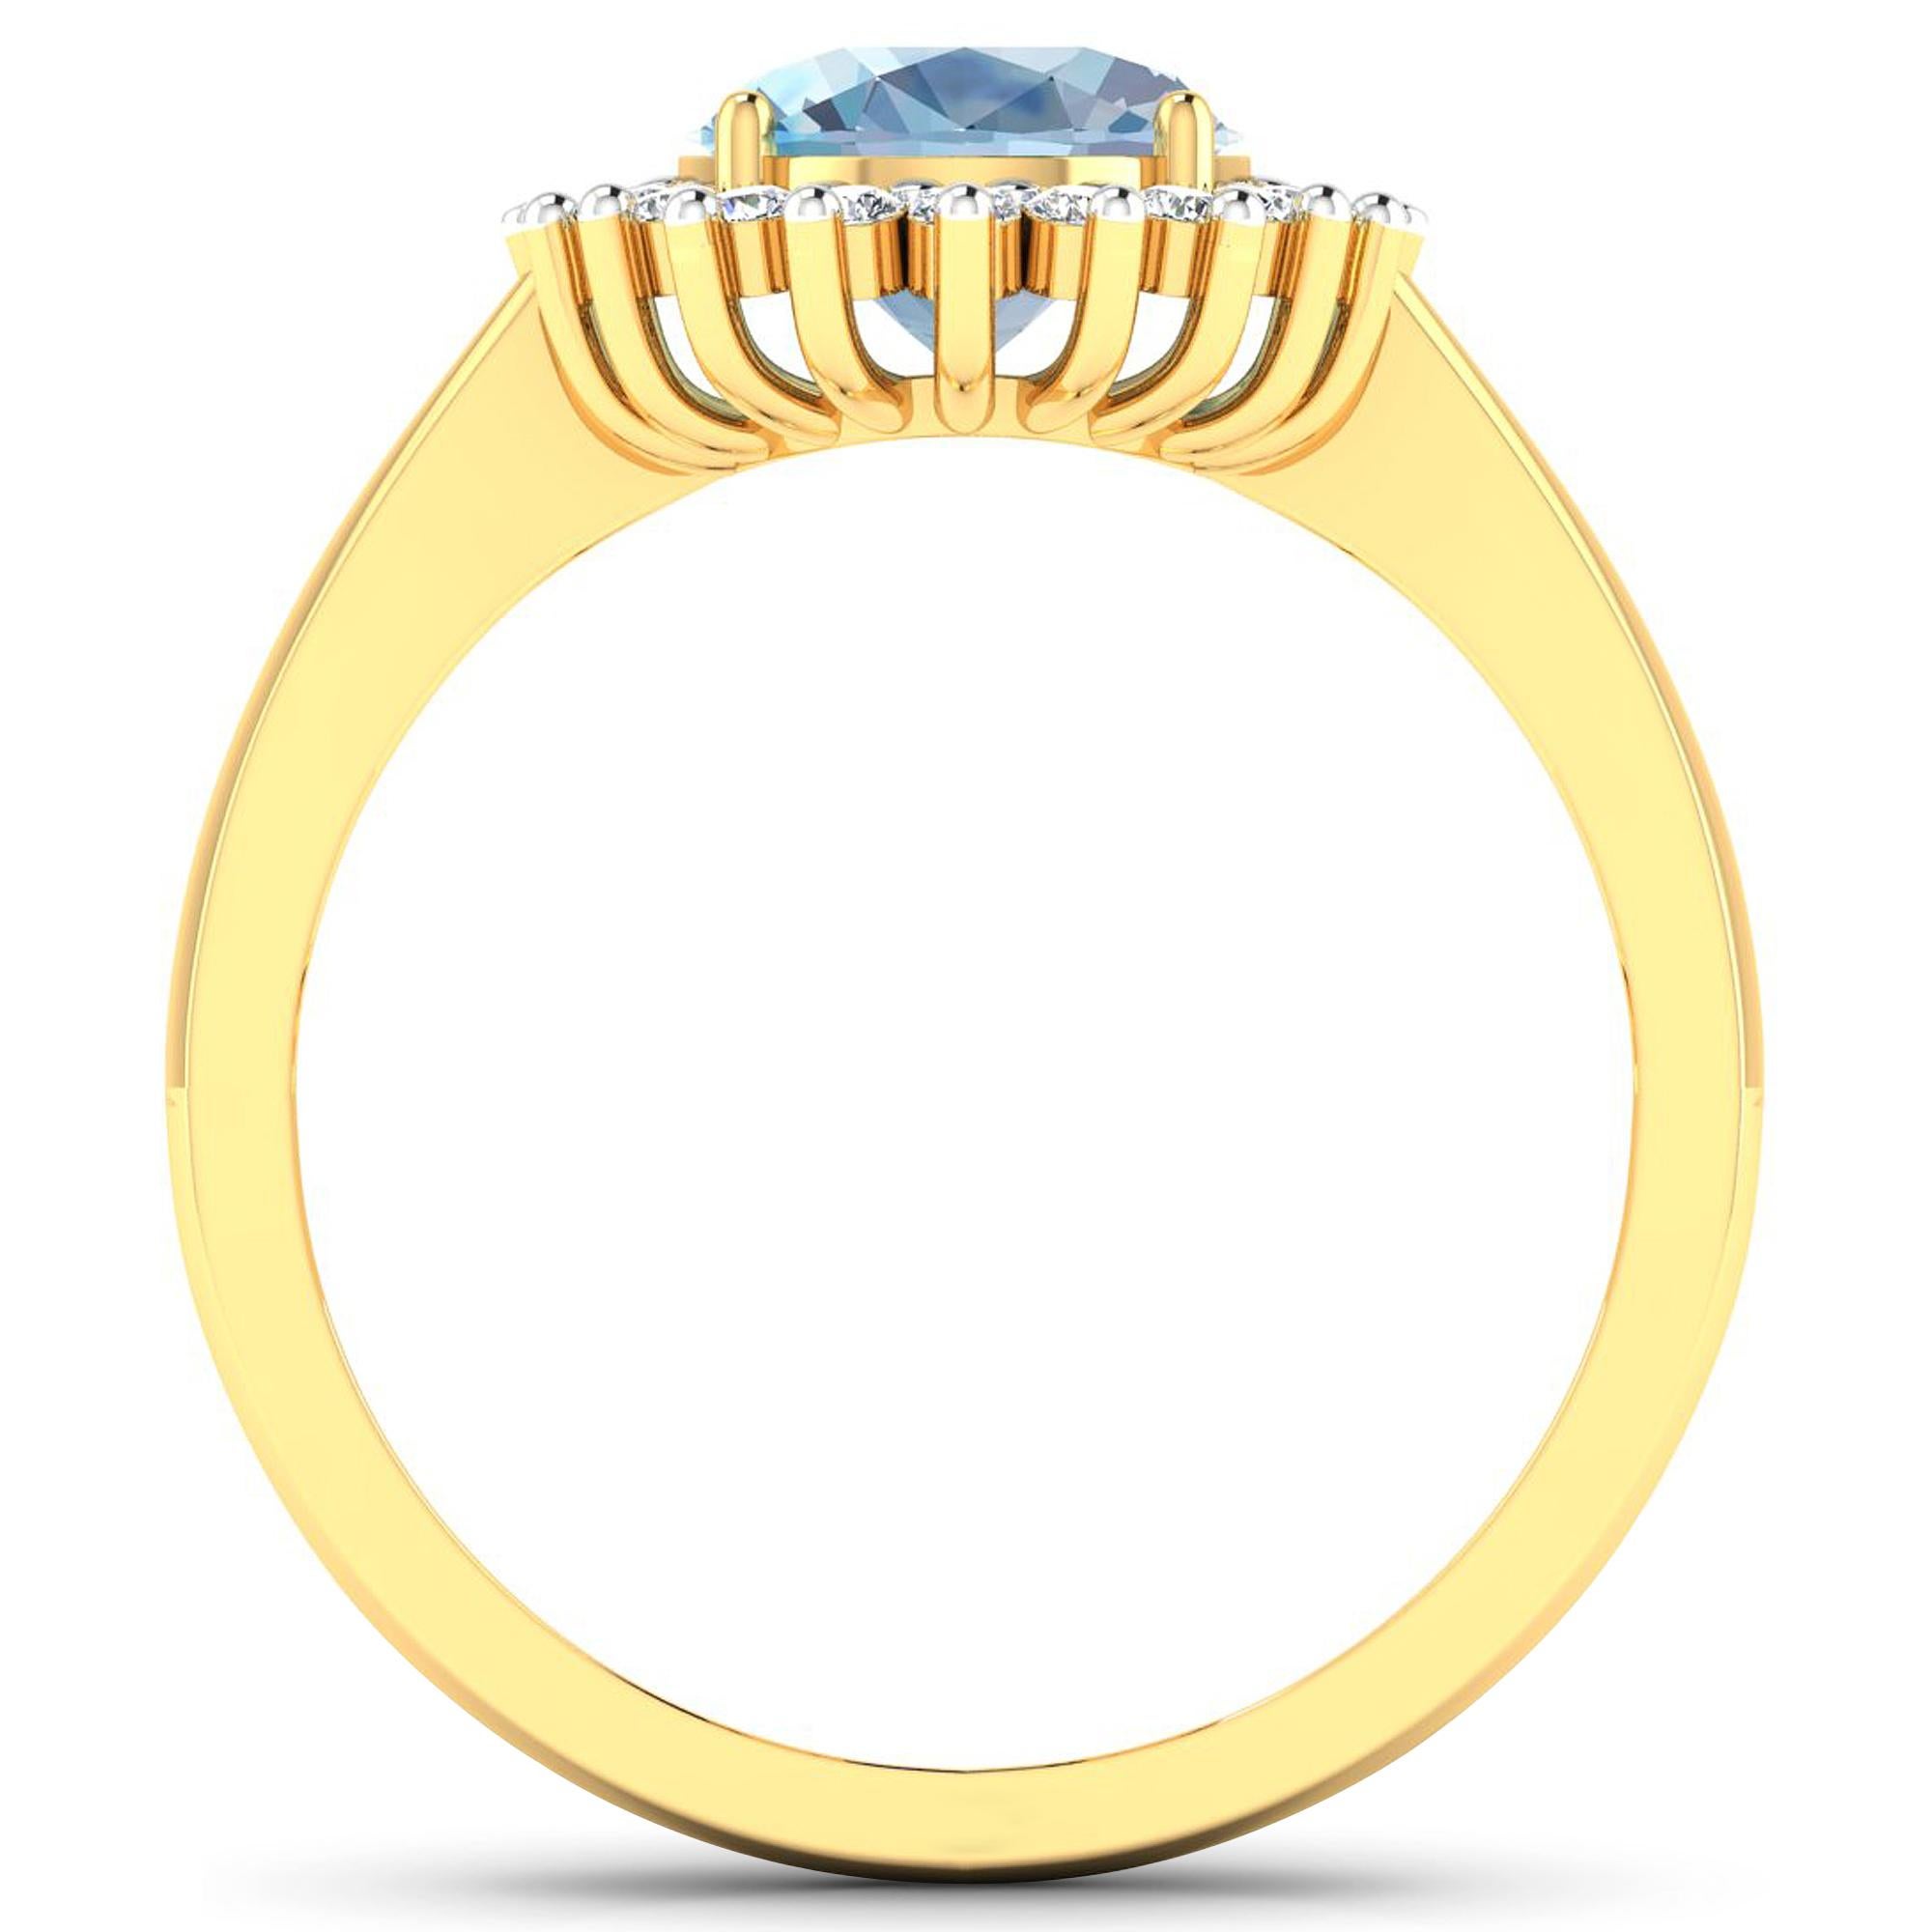 Aquamarine Gold Ring, 14Kt Gold Aquamarine & Diamond Engagement Ring, 1.24ctw.

Flaunt yourself with this 14K Yellow Gold Aquamarine & White Diamond Engagement Ring. The setting is inlaid with 17 accented full-cut White Diamond round stones for a